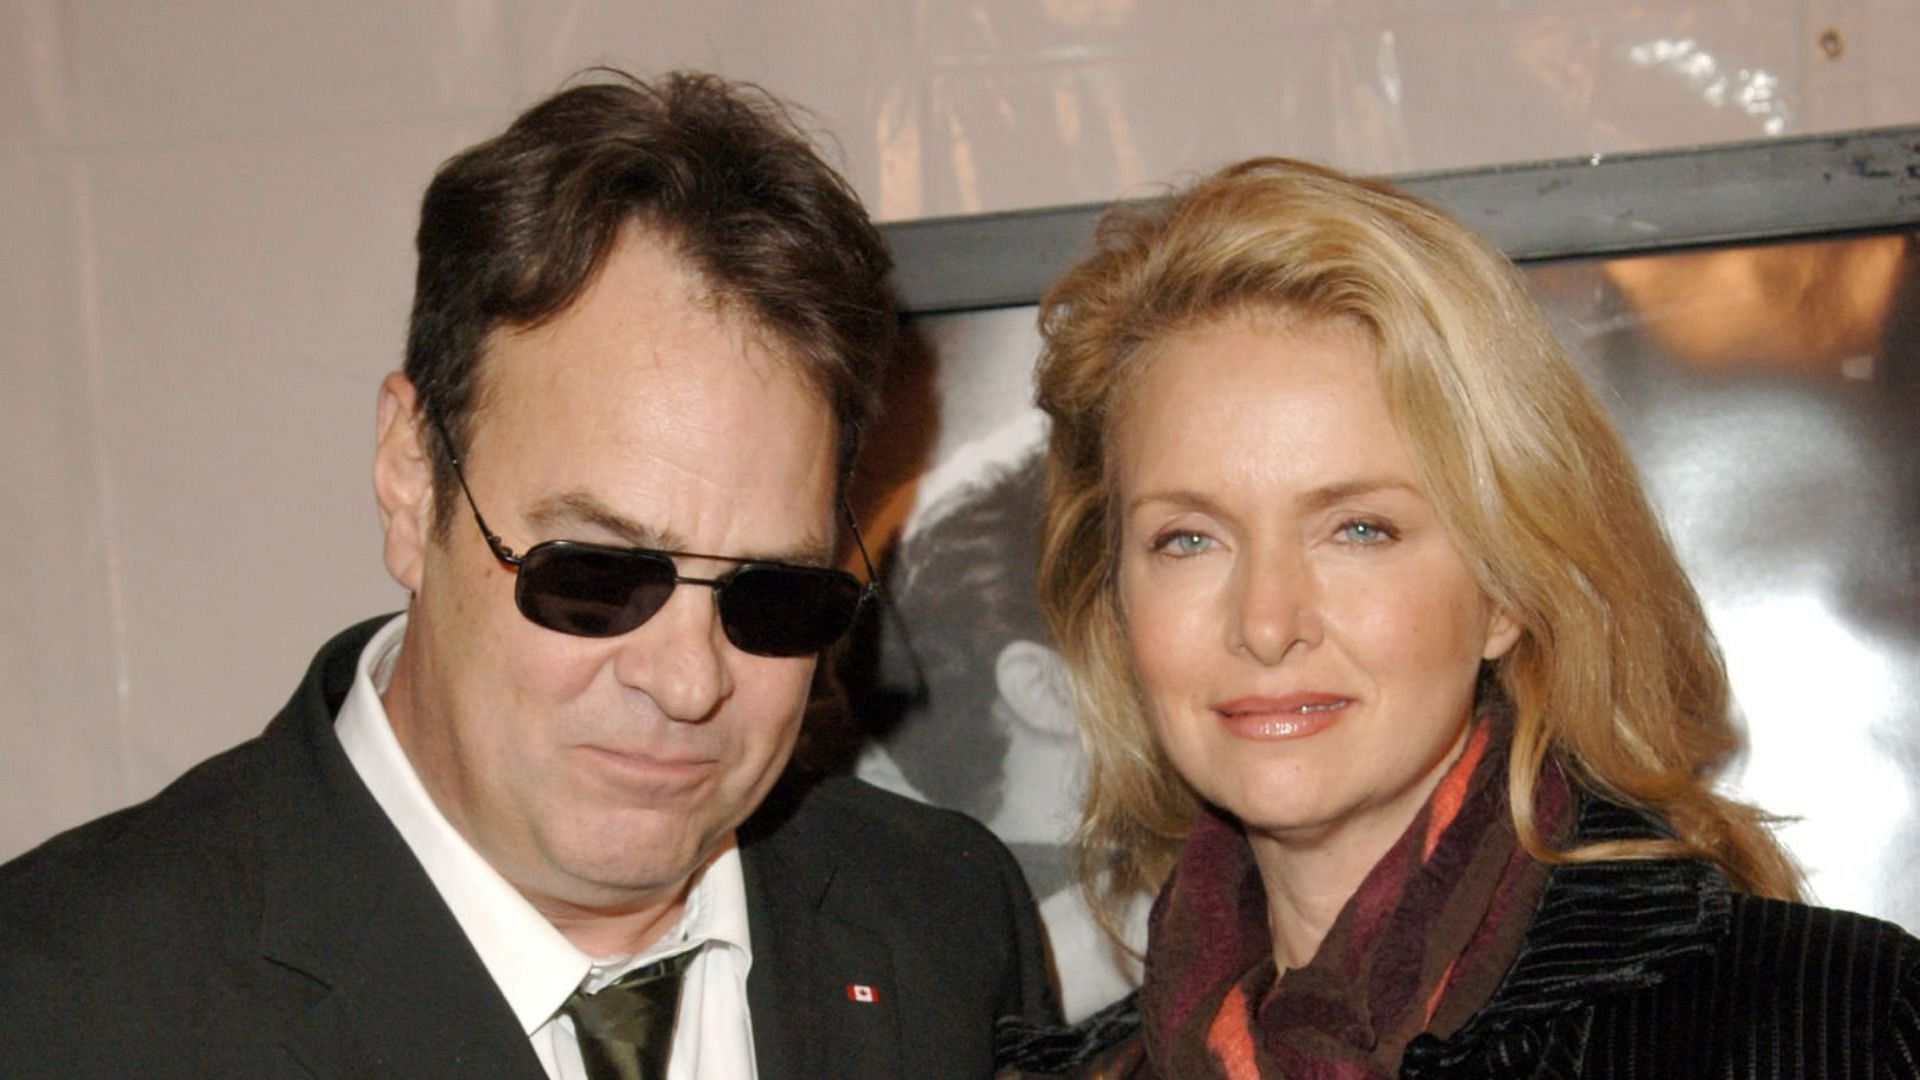 Dan Aykroyd and Donna Dixon have decided to part ways after 39 years of marriage (Image via Getty Images)